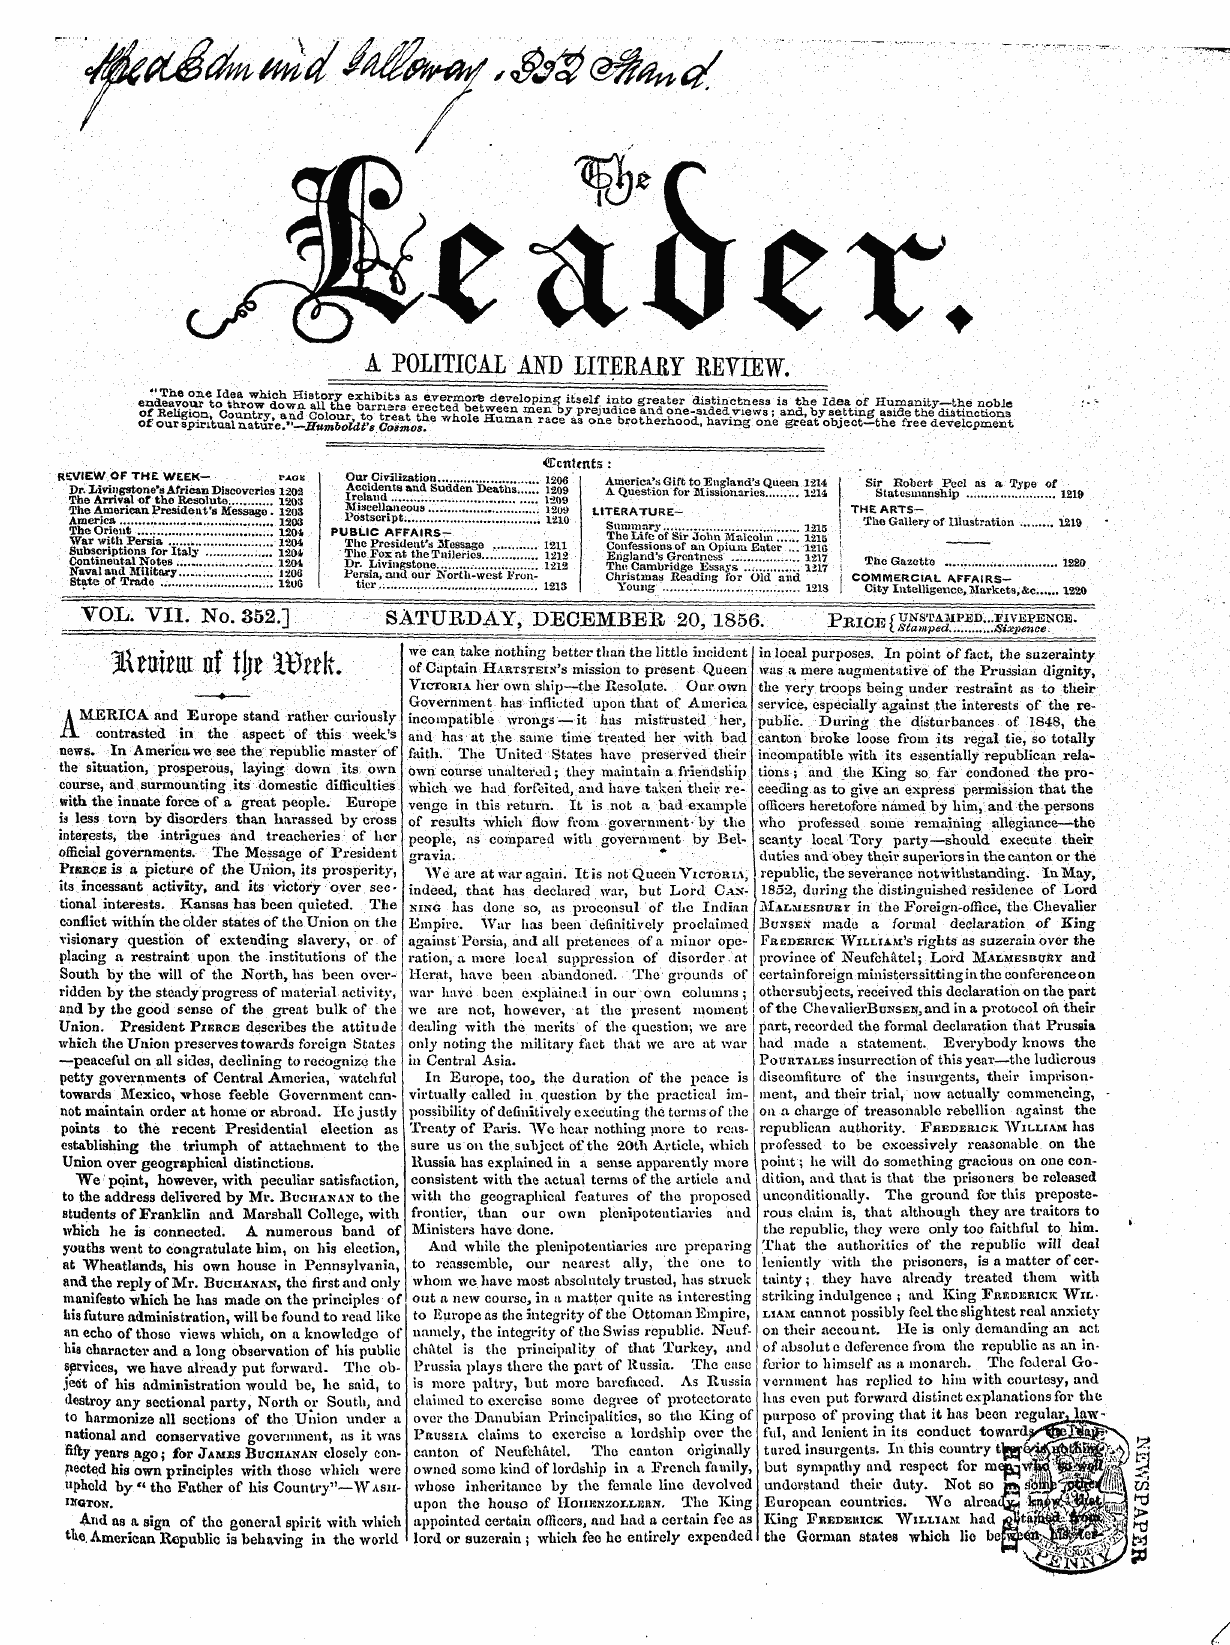 Leader (1850-1860): jS F Y, 2nd edition - ' : , . ¦ • ¦ ., . ¦ ;. ¦¦ ¦ . ¦:¦ ¦ ¦ ¦ .. '¦¦ ' ¦ ' ' : ' ¦ ' . ' ¦ \ " ¦ ' -\ ¦ - , : ' . . . ¦ ¦ ' ' ¦ ' ¦ Contents : ¦ , ¦;/. ; ' . ' . :¦ ¦ • .;..- , . ¦ .;¦ ' ¦¦ ¦ ¦